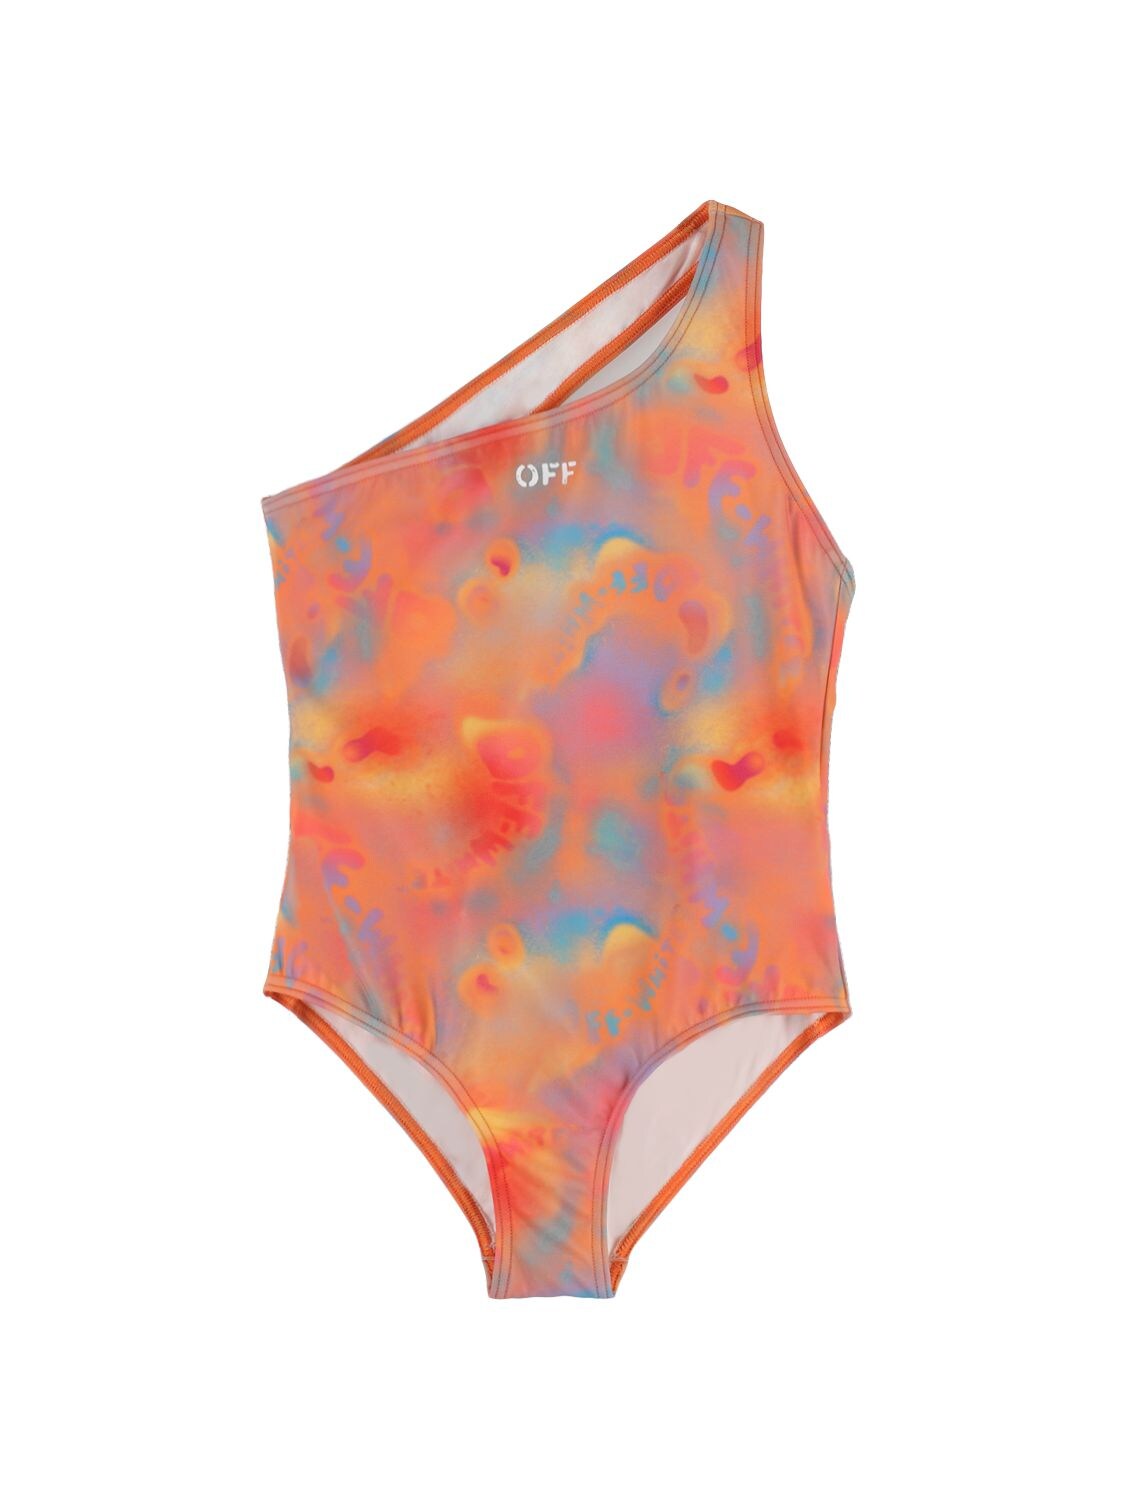 OFF-WHITE PRINTED TECH ONE PIECE SWIMSUIT